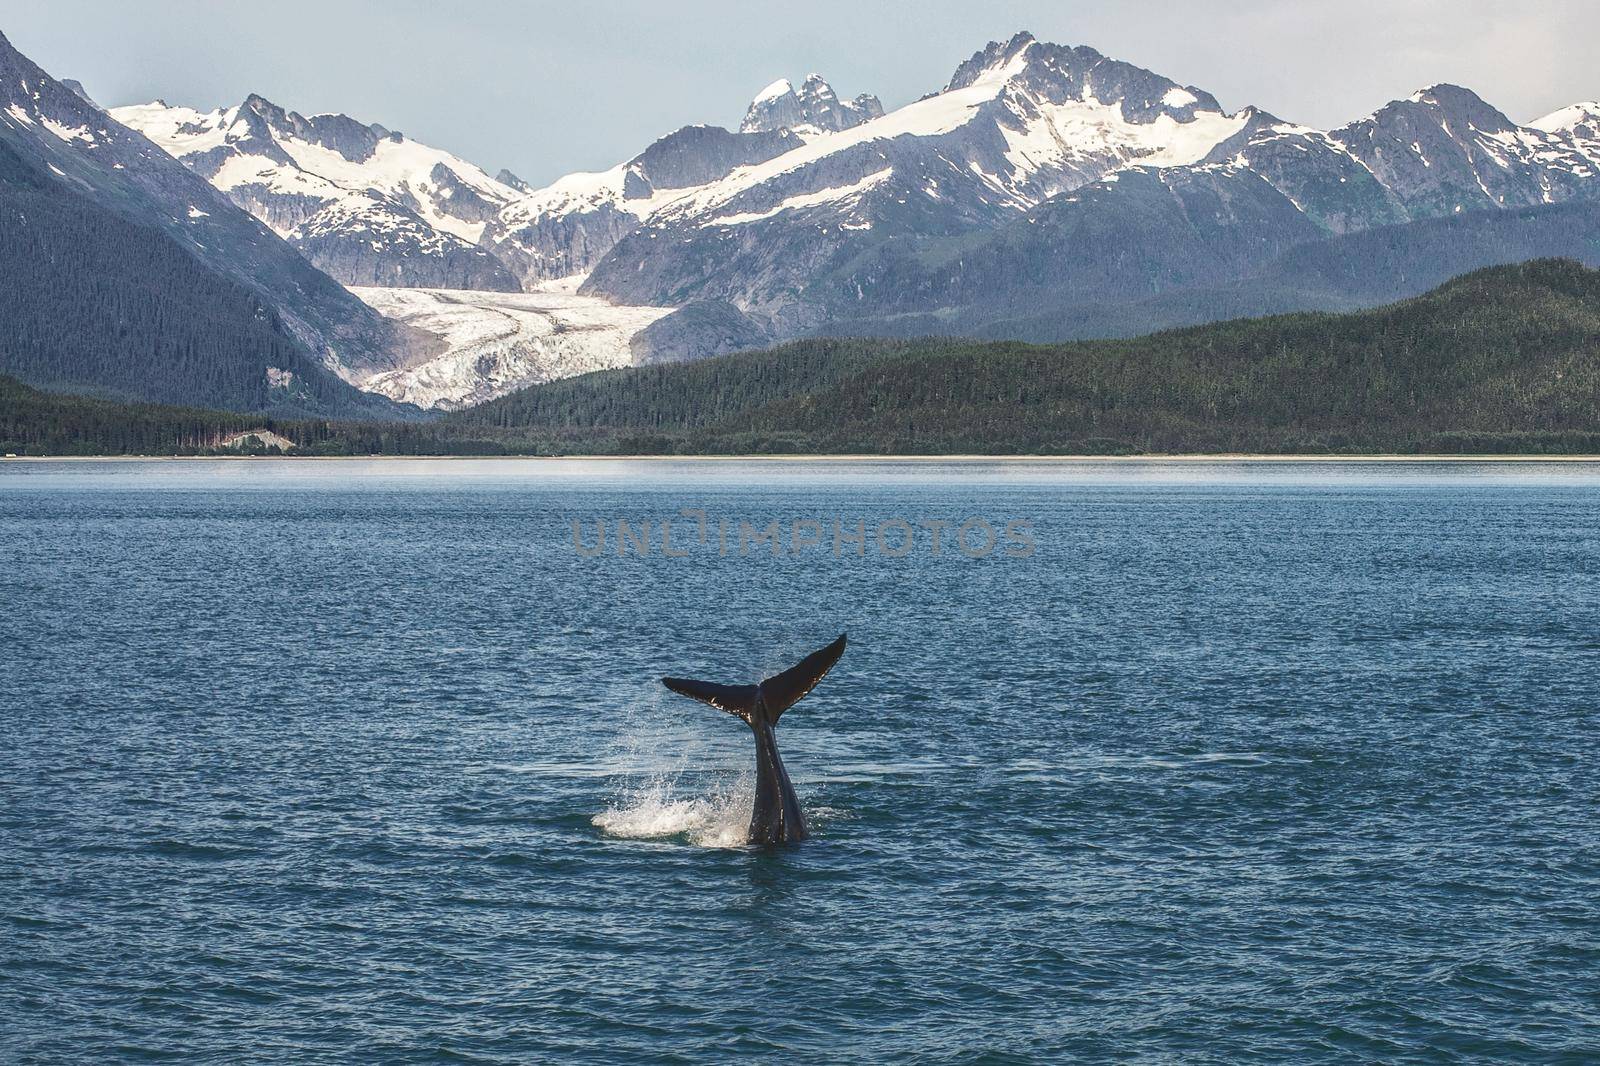 Baby Humpback Whale and Alaskan Landscape with Glacier by wondry